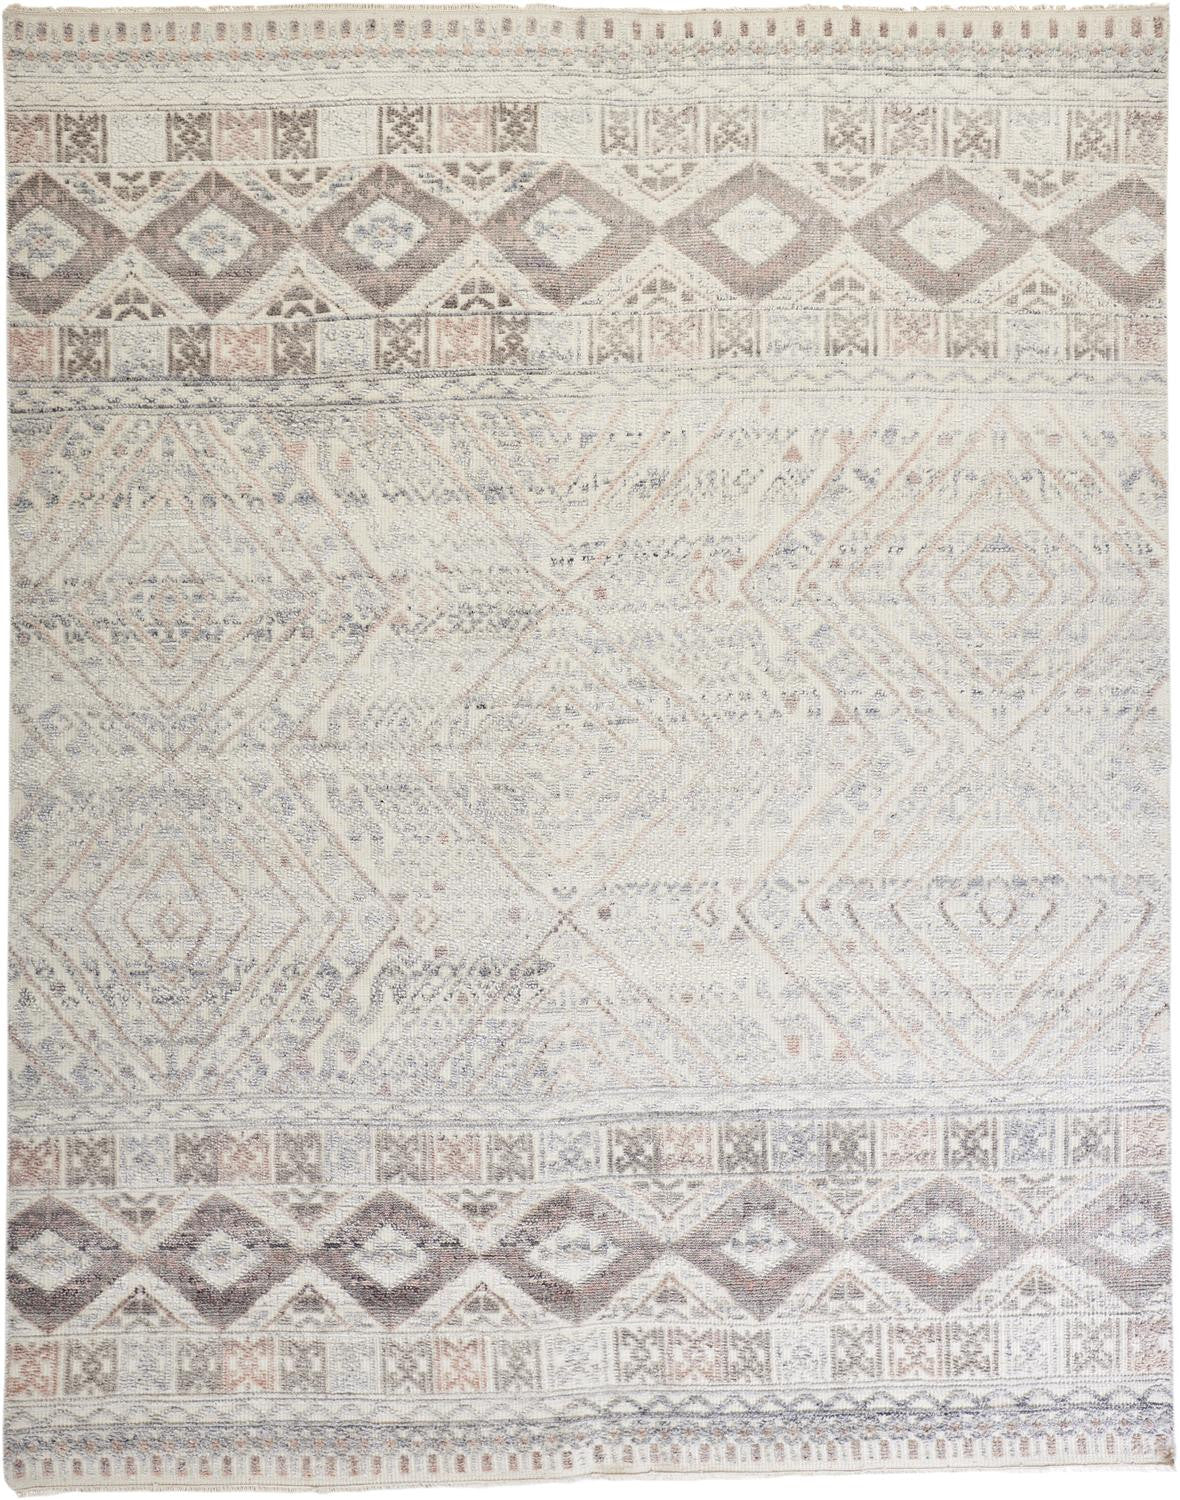 4' X 6' Gray Ivory And Pink Geometric Hand Knotted Area Rug